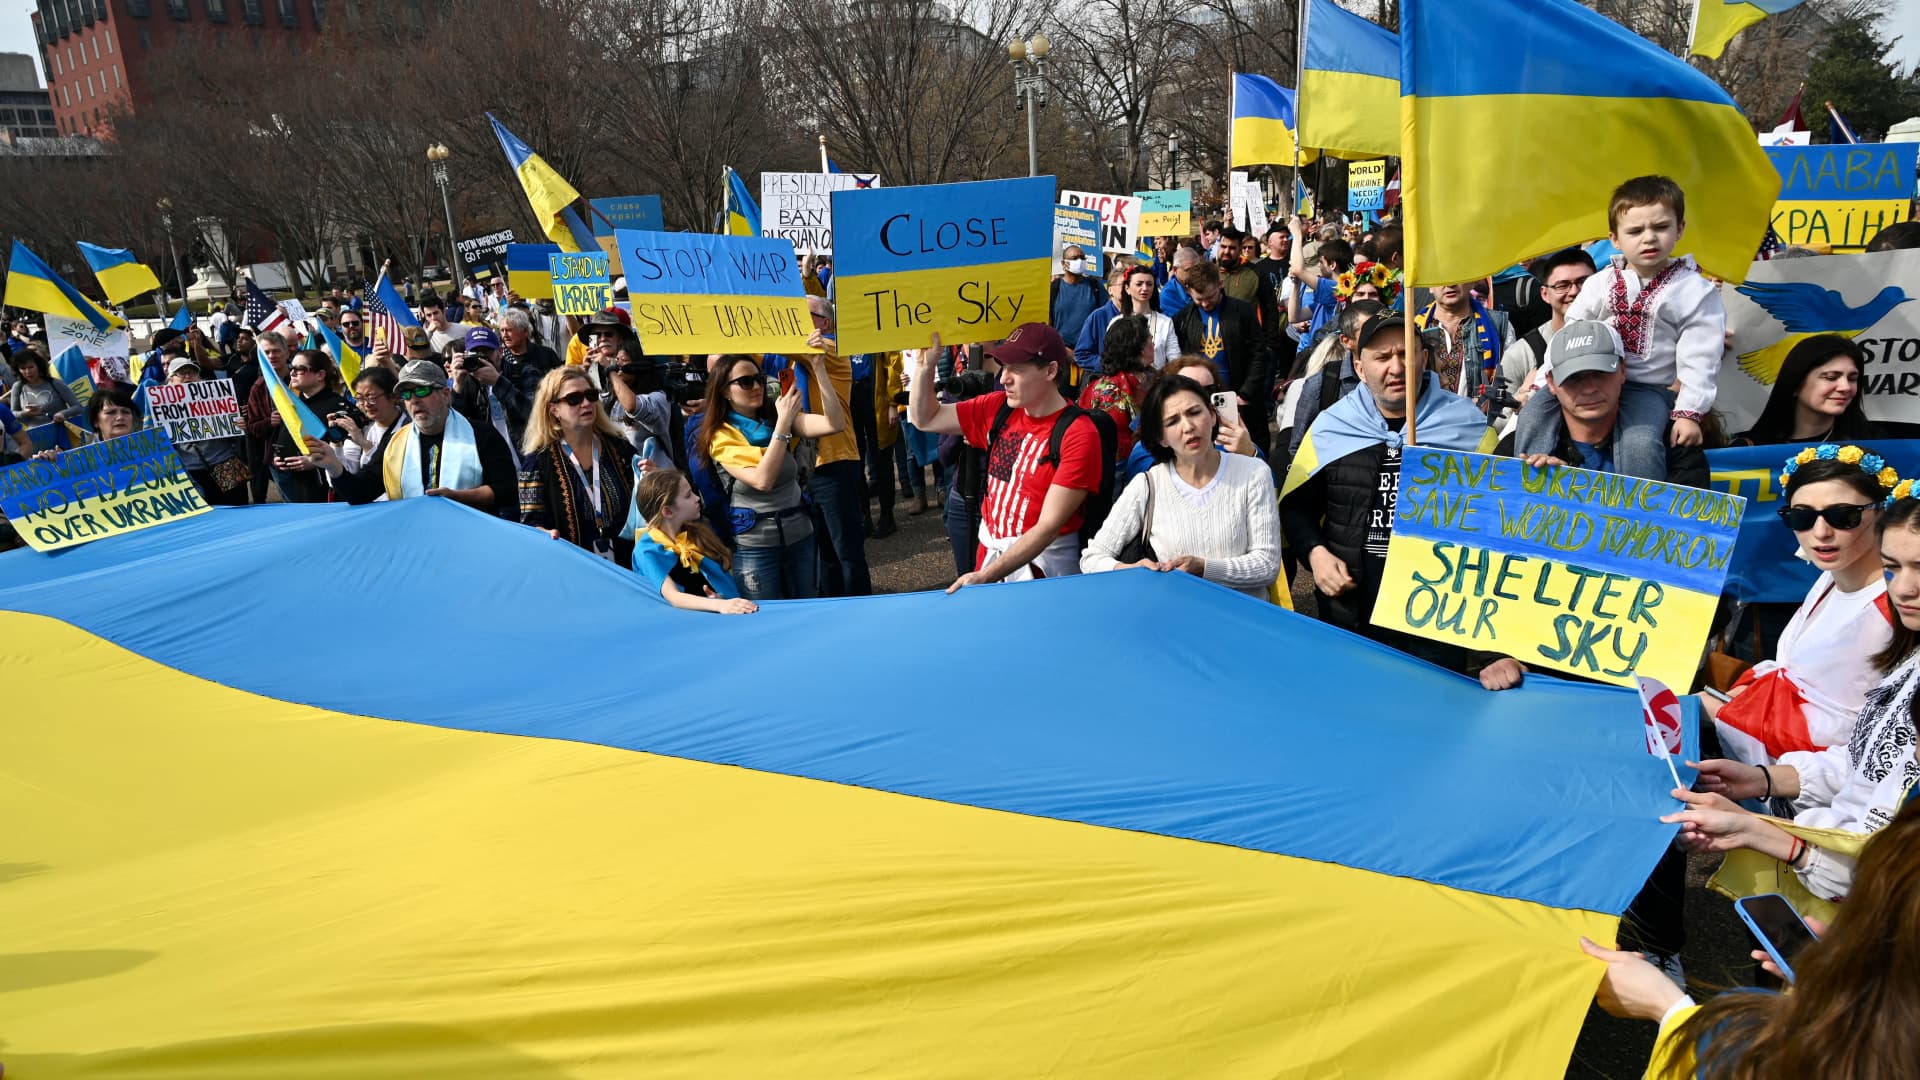 Supporters hold up signs and Ukrainian flags during a rally protesting the Russian invasion of Ukraine at Lafayette Square across the White House in Washington, DC, on March 6, 2022.